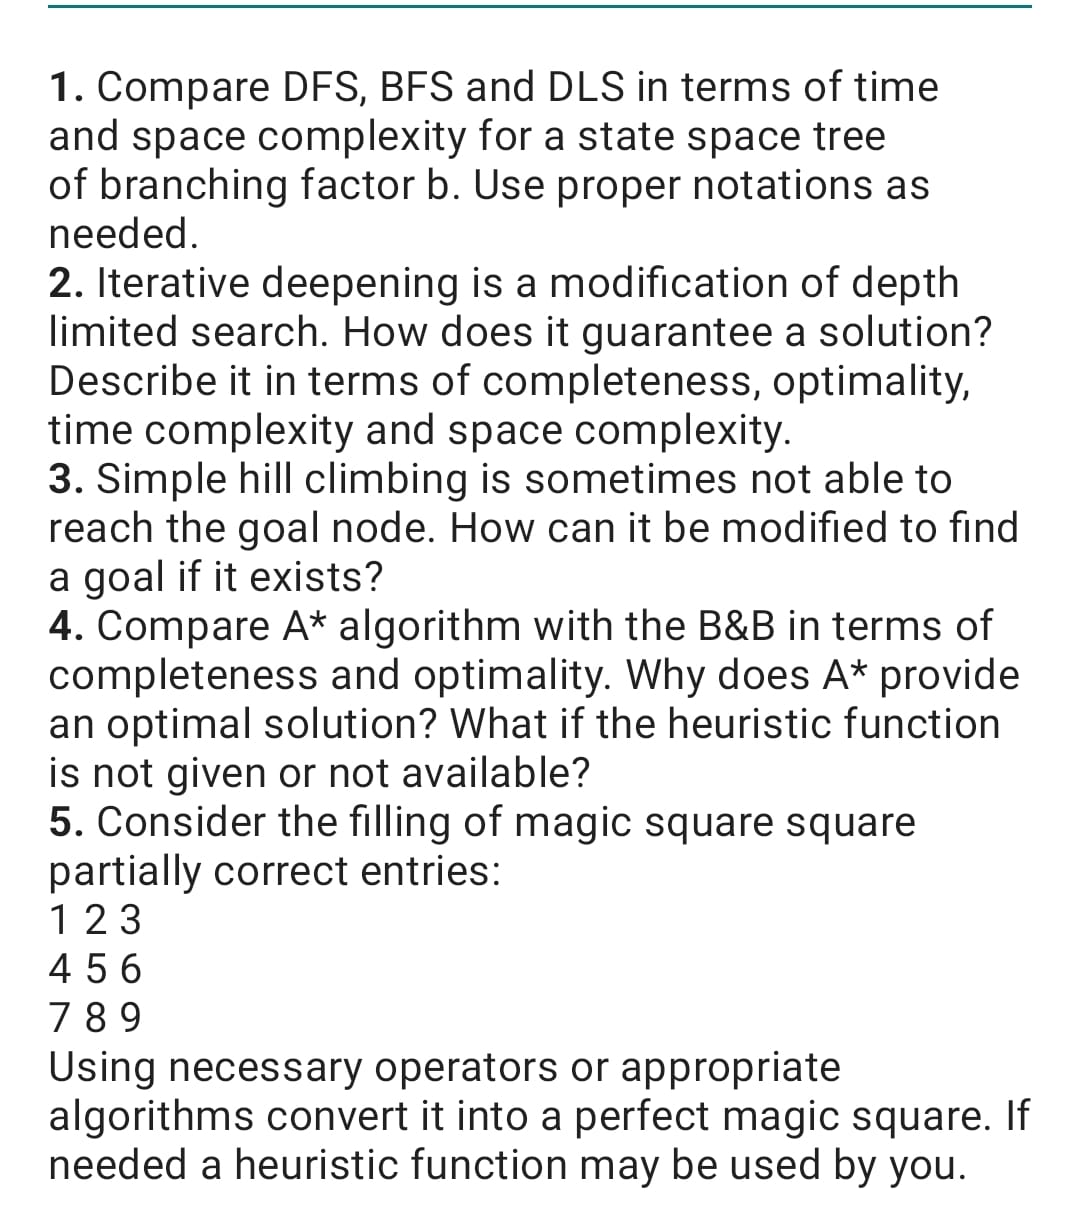 1. Compare DFS, BFS and DLS in terms of time and space complexity for a state space tree of branching factor